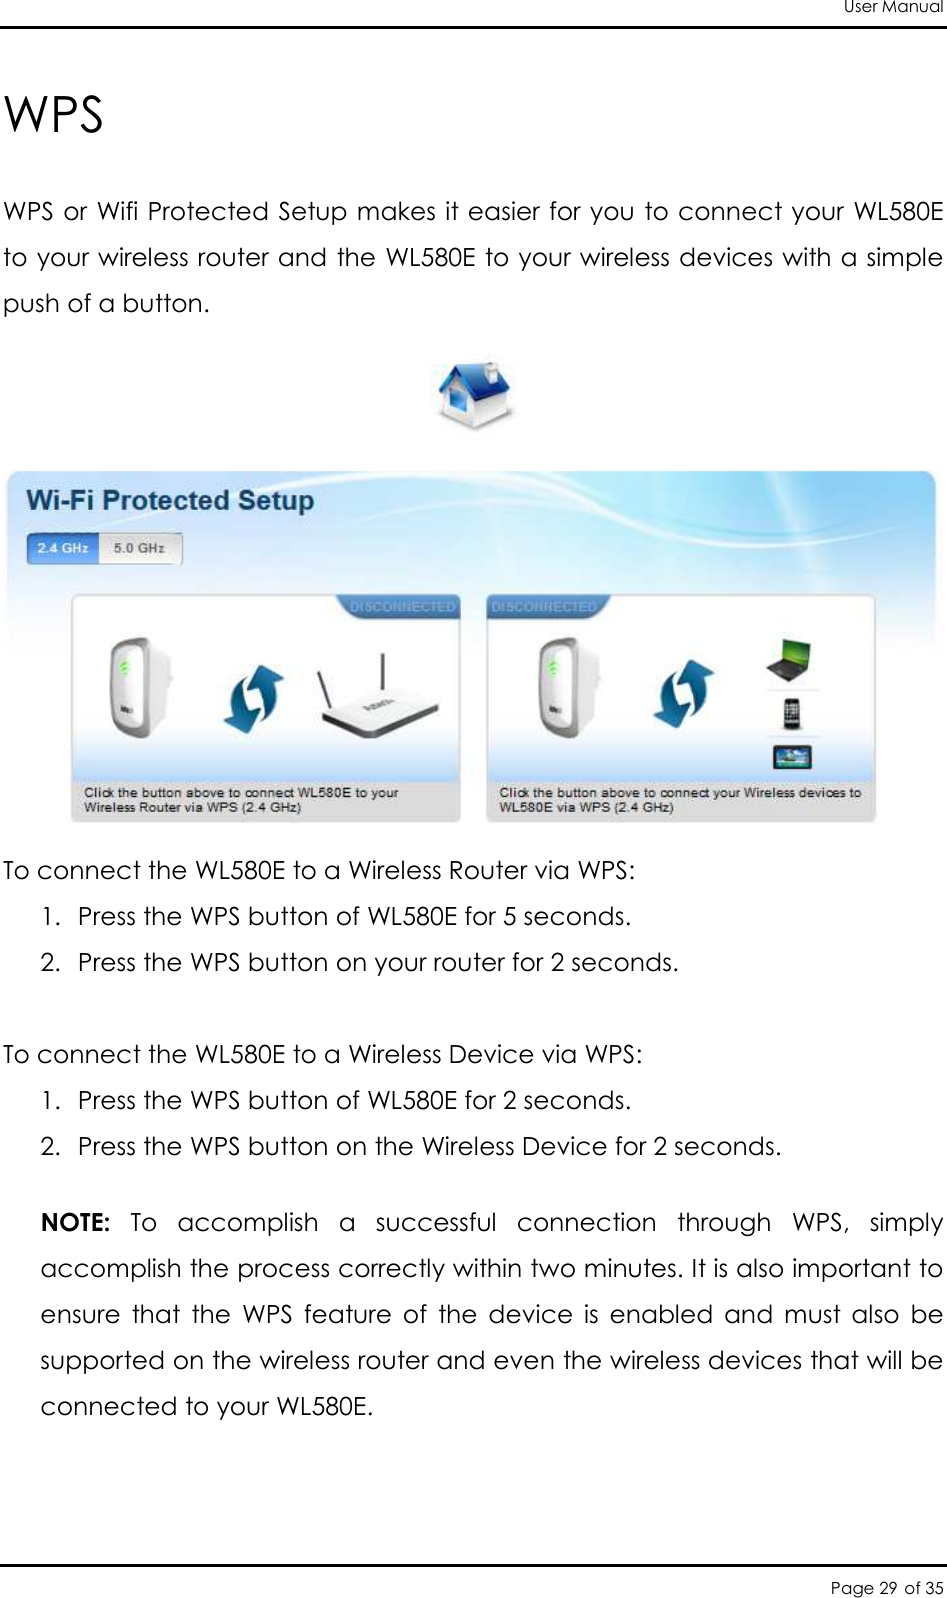 User Manual Page 29 of 35 WPS WPS or Wifi Protected Setup makes it easier for you to connect your WL580E to your wireless router and the WL580E to your wireless devices with a simple push of a button.   To connect the WL580E to a Wireless Router via WPS:  1. Press the WPS button of WL580E for 5 seconds.  2. Press the WPS button on your router for 2 seconds.   To connect the WL580E to a Wireless Device via WPS:  1. Press the WPS button of WL580E for 2 seconds.  2. Press the WPS button on the Wireless Device for 2 seconds.   NOTE:  To  accomplish  a  successful  connection  through  WPS,  simply accomplish the process correctly within two minutes. It is also important to ensure  that  the  WPS  feature  of  the  device  is  enabled  and  must  also  be supported on the wireless router and even the wireless devices that will be connected to your WL580E.  